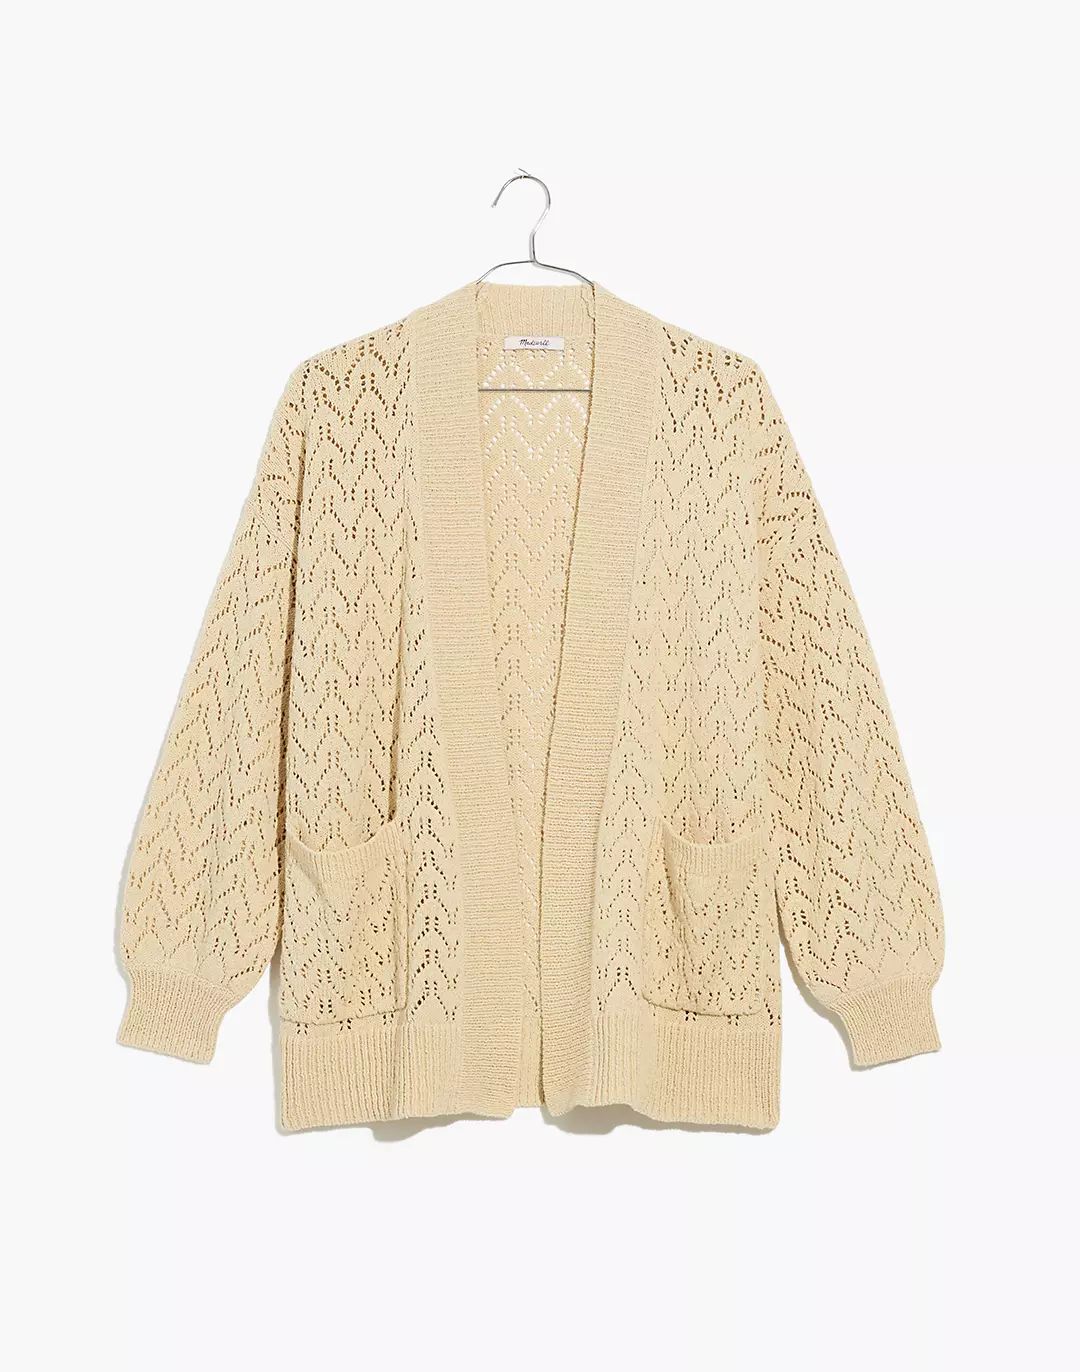 Corley Pointelle Cardigan Sweater | Madewell